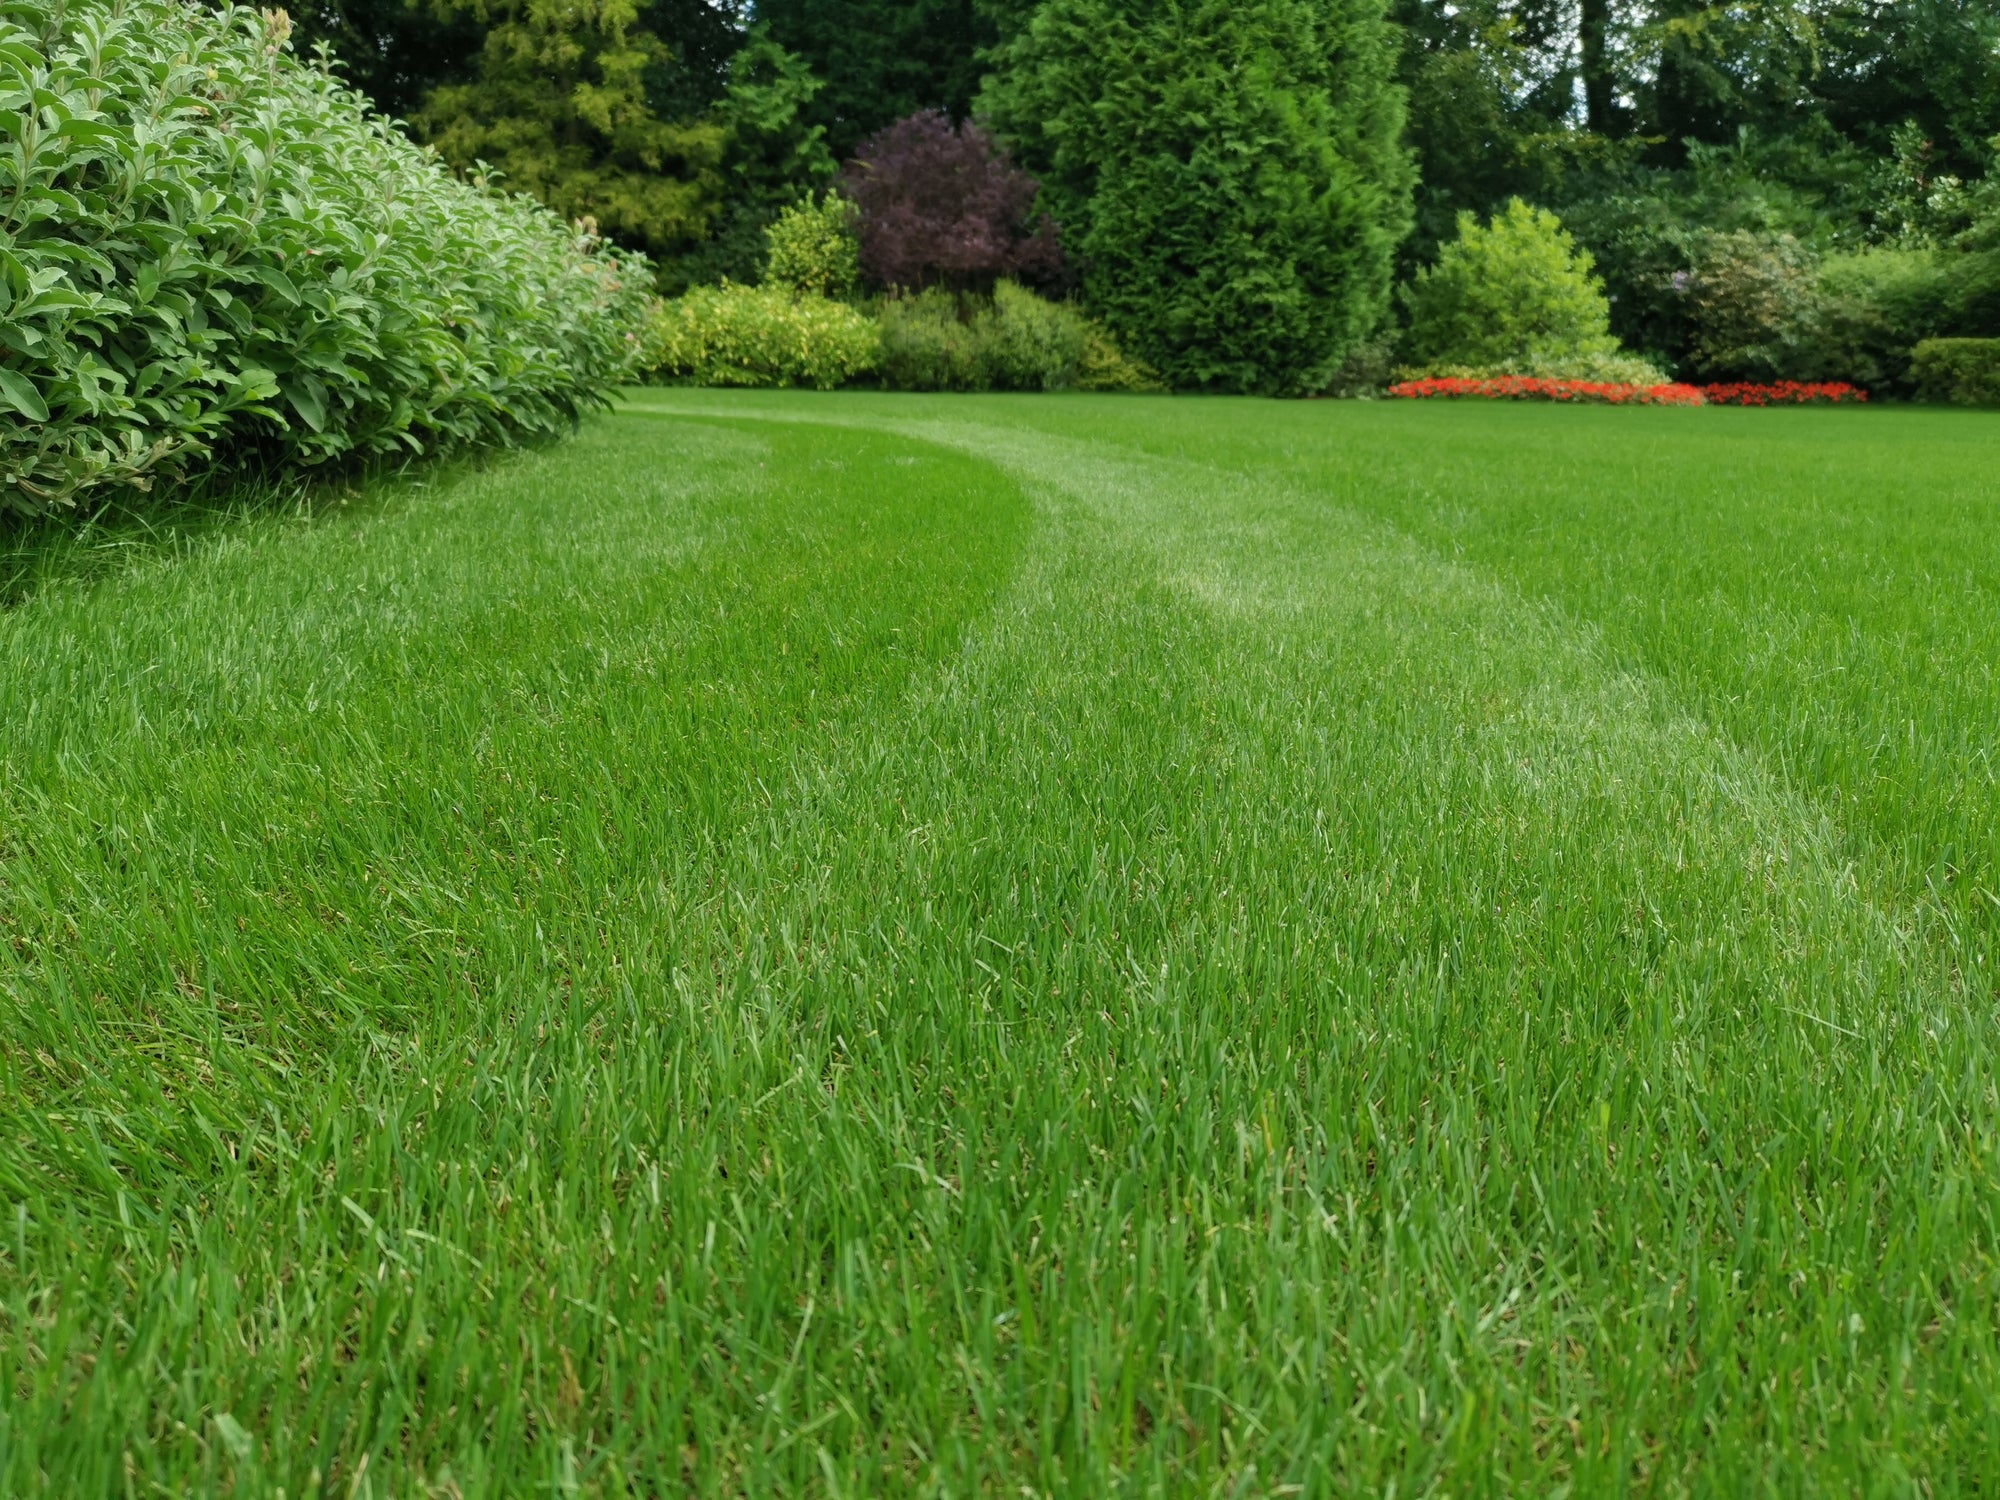 How to grow greener grass